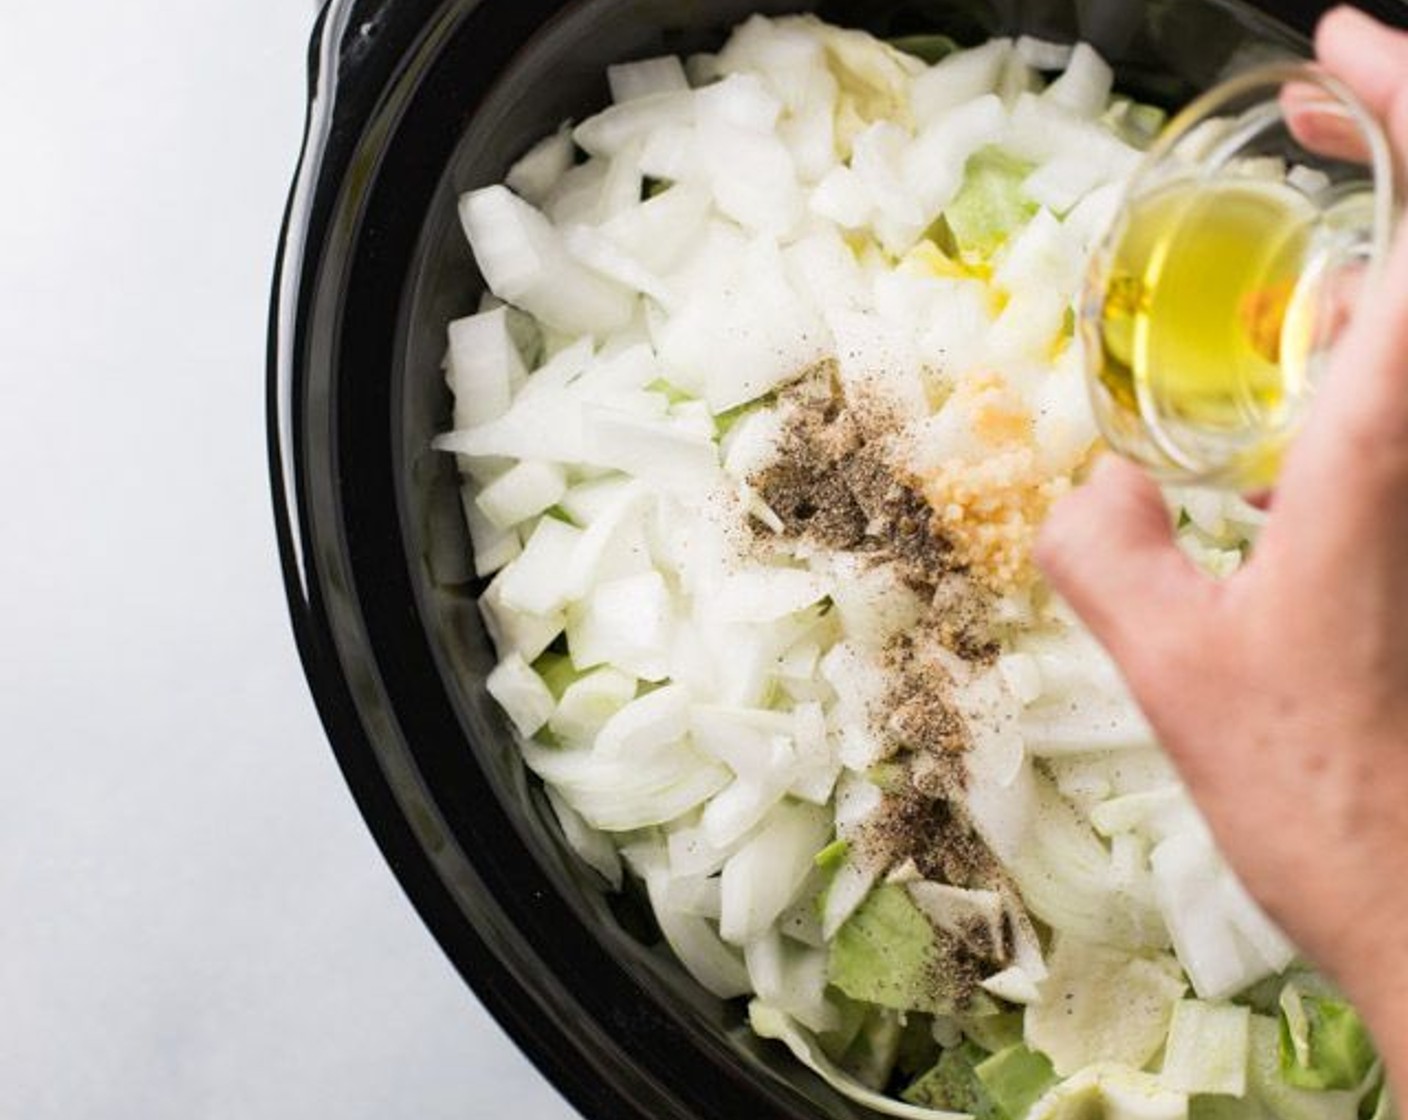 step 3 Add green cabbage, sweet onion, Garlic (1 tsp), Olive Oil (1 Tbsp), Water (3 Tbsp), Salt (1 Tbsp) and Freshly Ground Black Pepper (1/2 tsp) to your slow cooker.